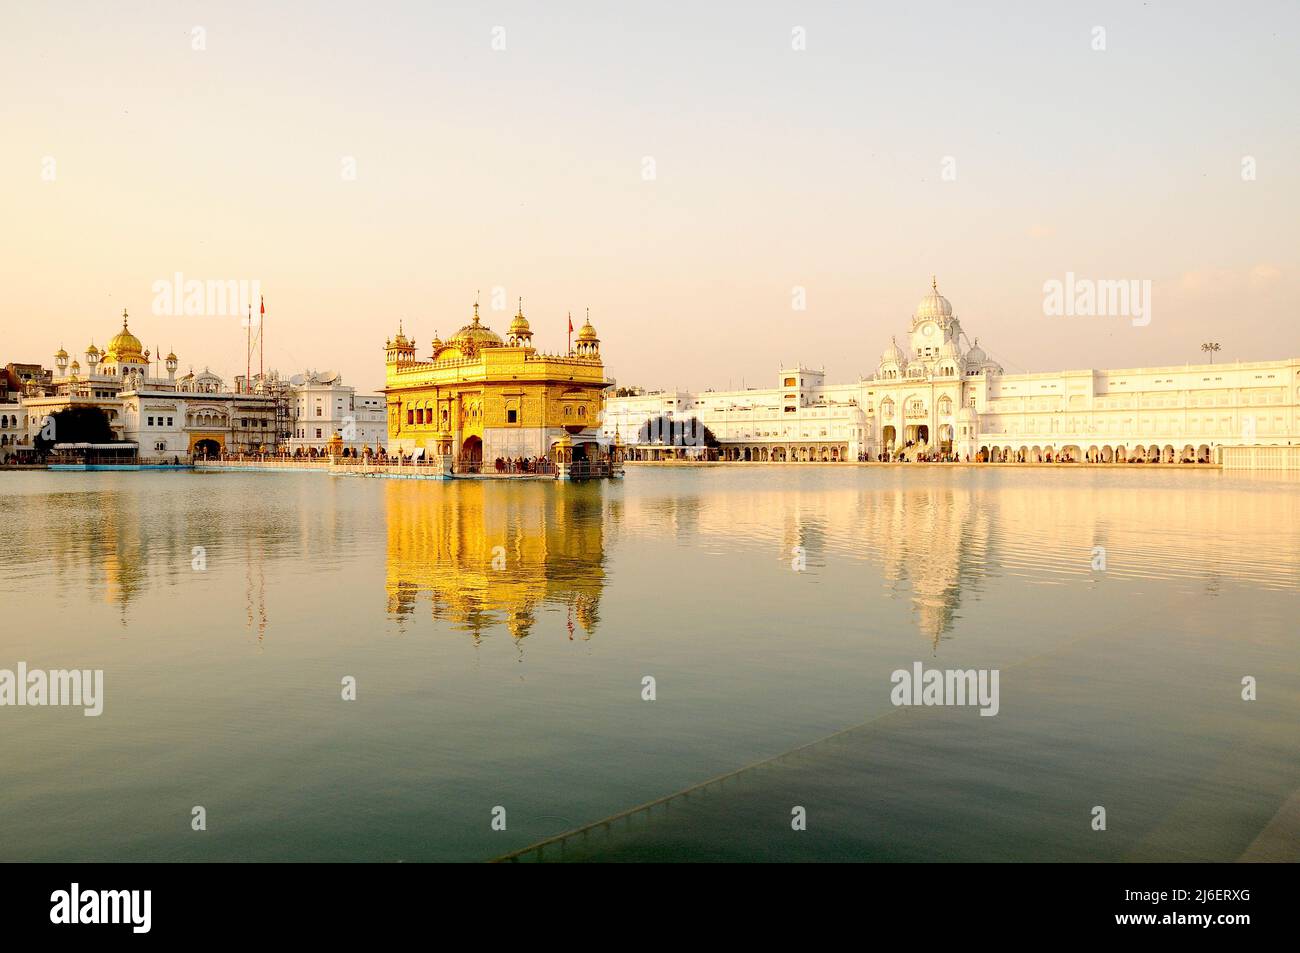 The golden temple of Sikh religion at sunset in Amritsar, Punjab, India. Stock Photo